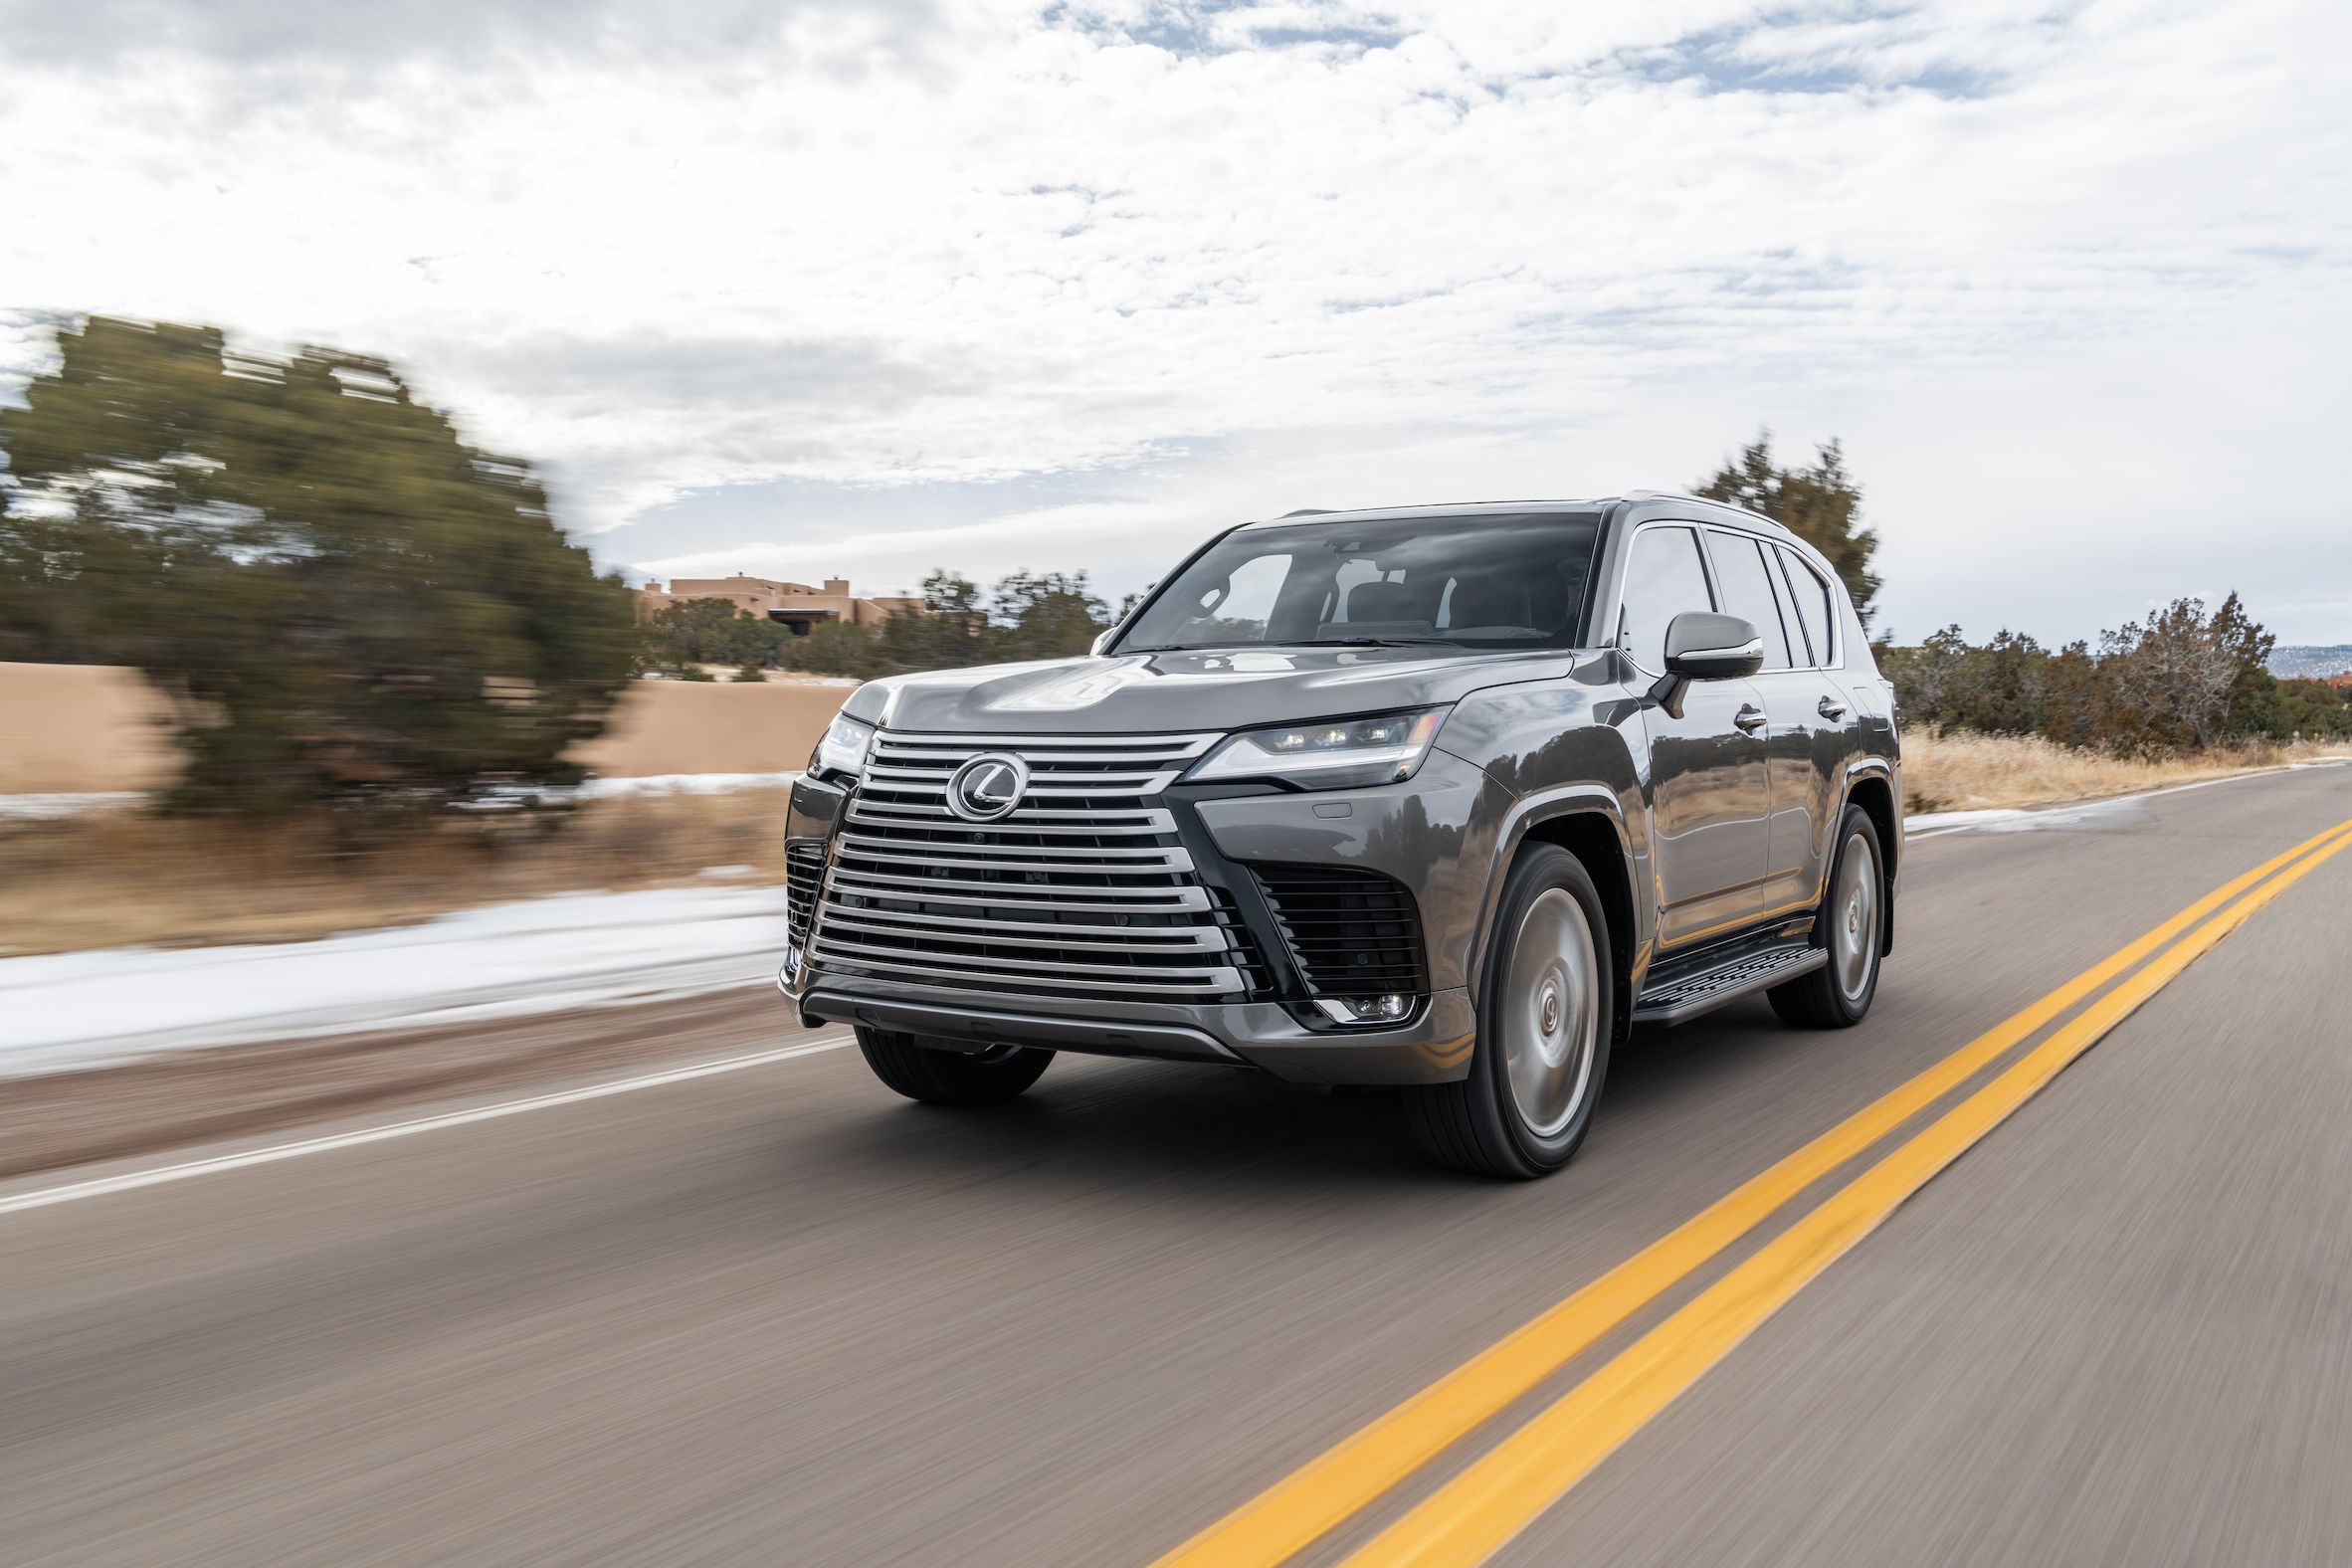 2022 Lexus LX 600 SUV: Latest Prices, Reviews, Specs, Photos and Incentives